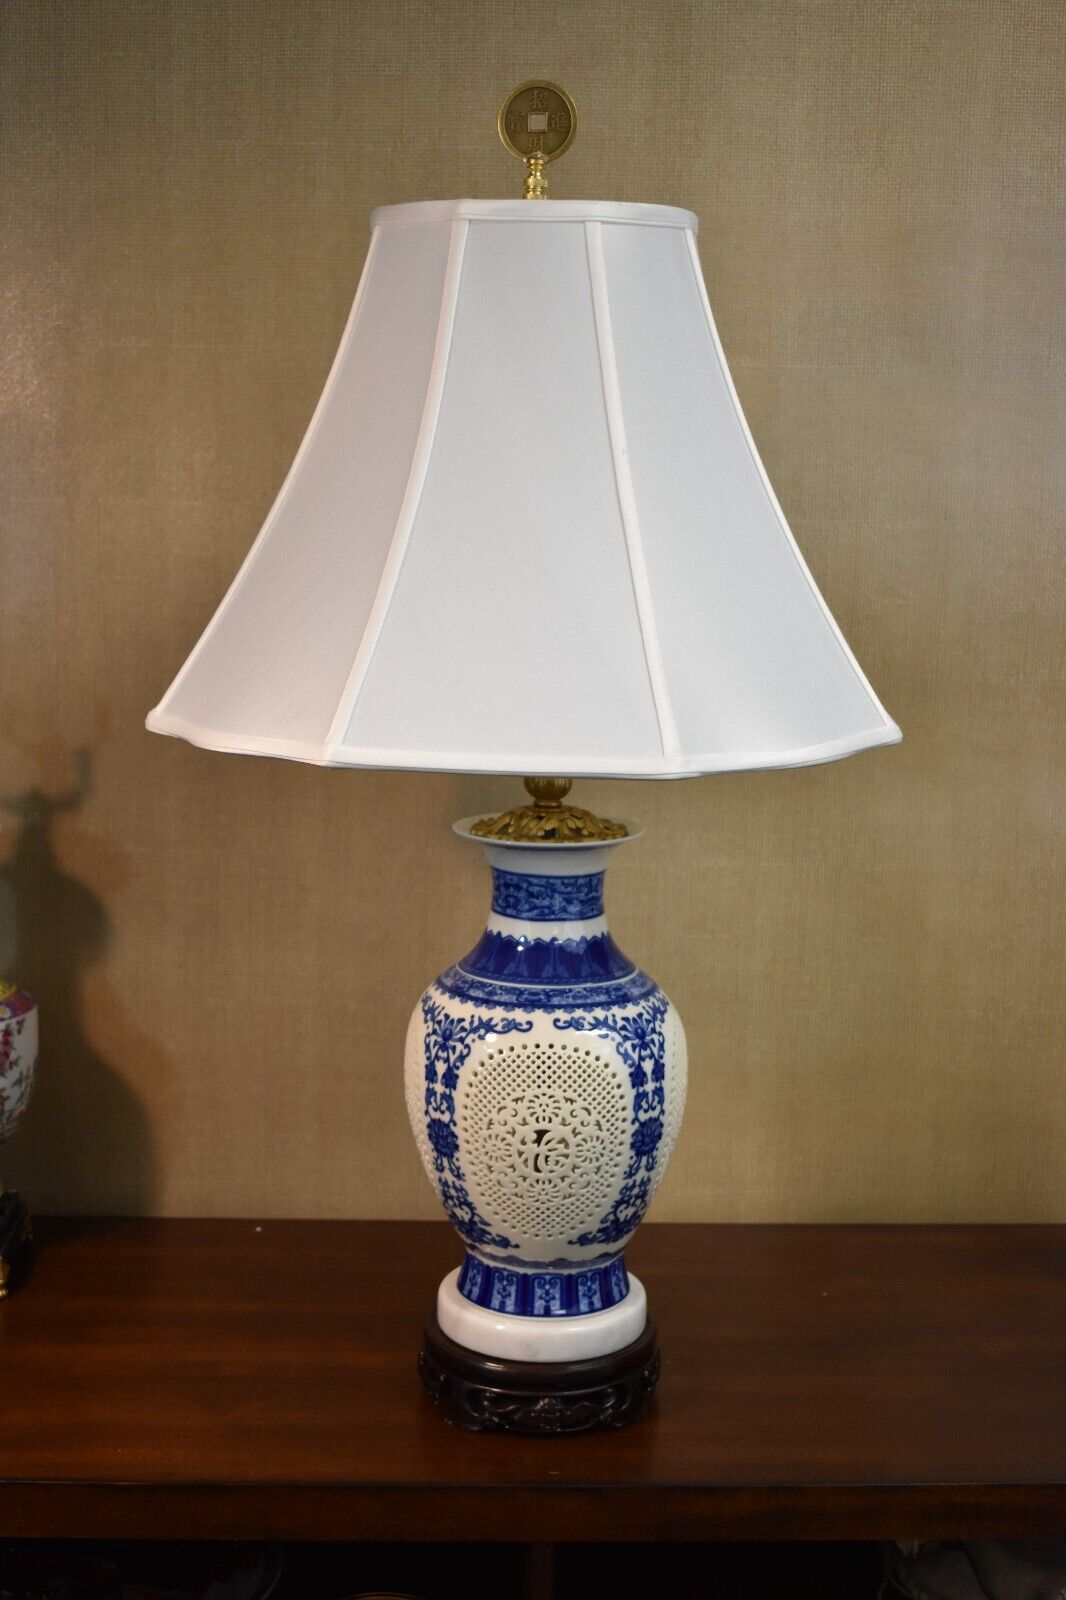 PAIR OF 28" CHINESE BLUE & WHITE PORCELAIN VASE LAMP PIERCED CARVED/RETICULATED CLASSIC DECOR LAMPS